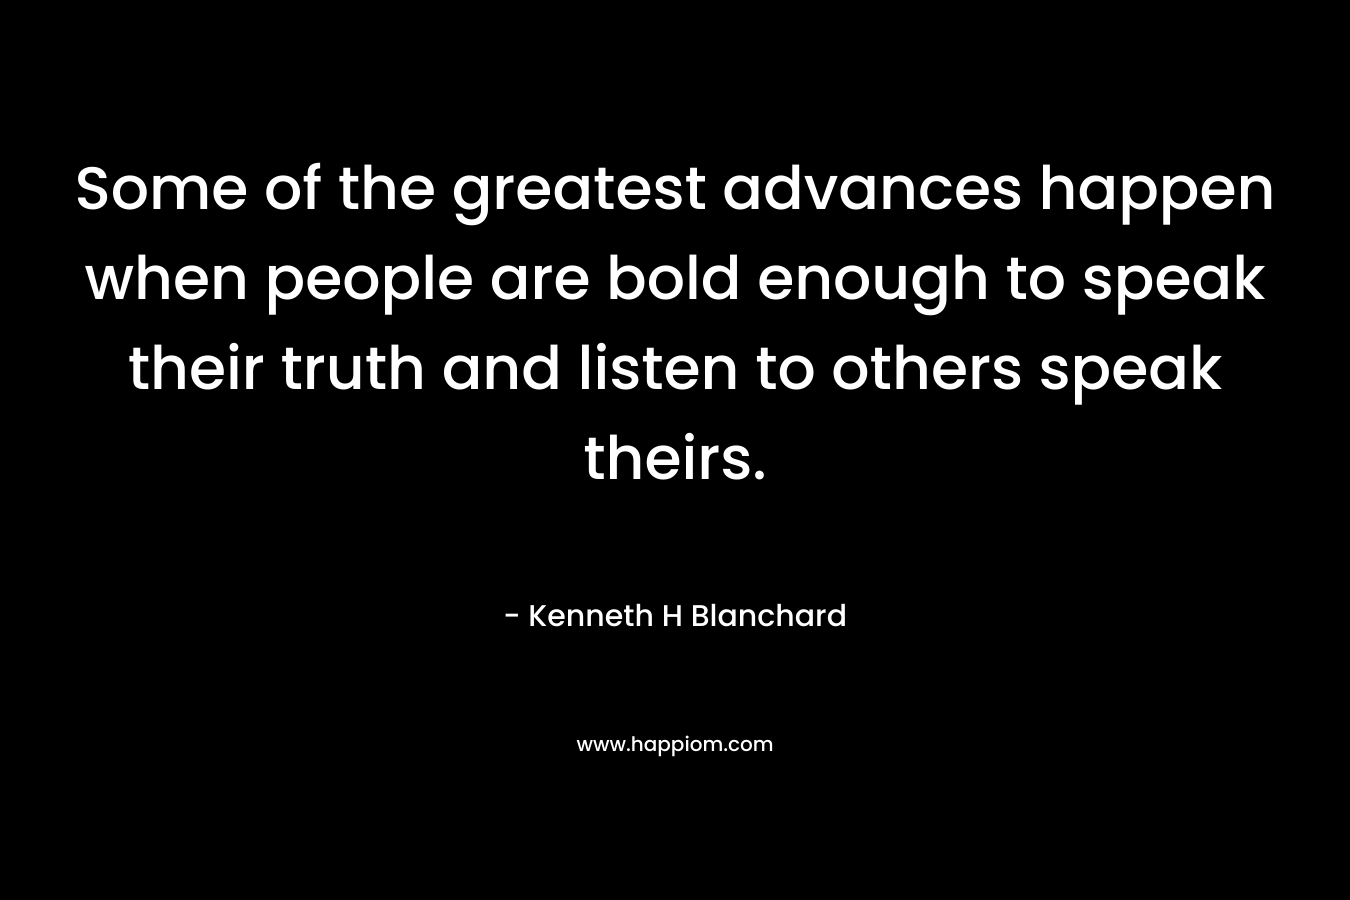 Some of the greatest advances happen when people are bold enough to speak their truth and listen to others speak theirs.